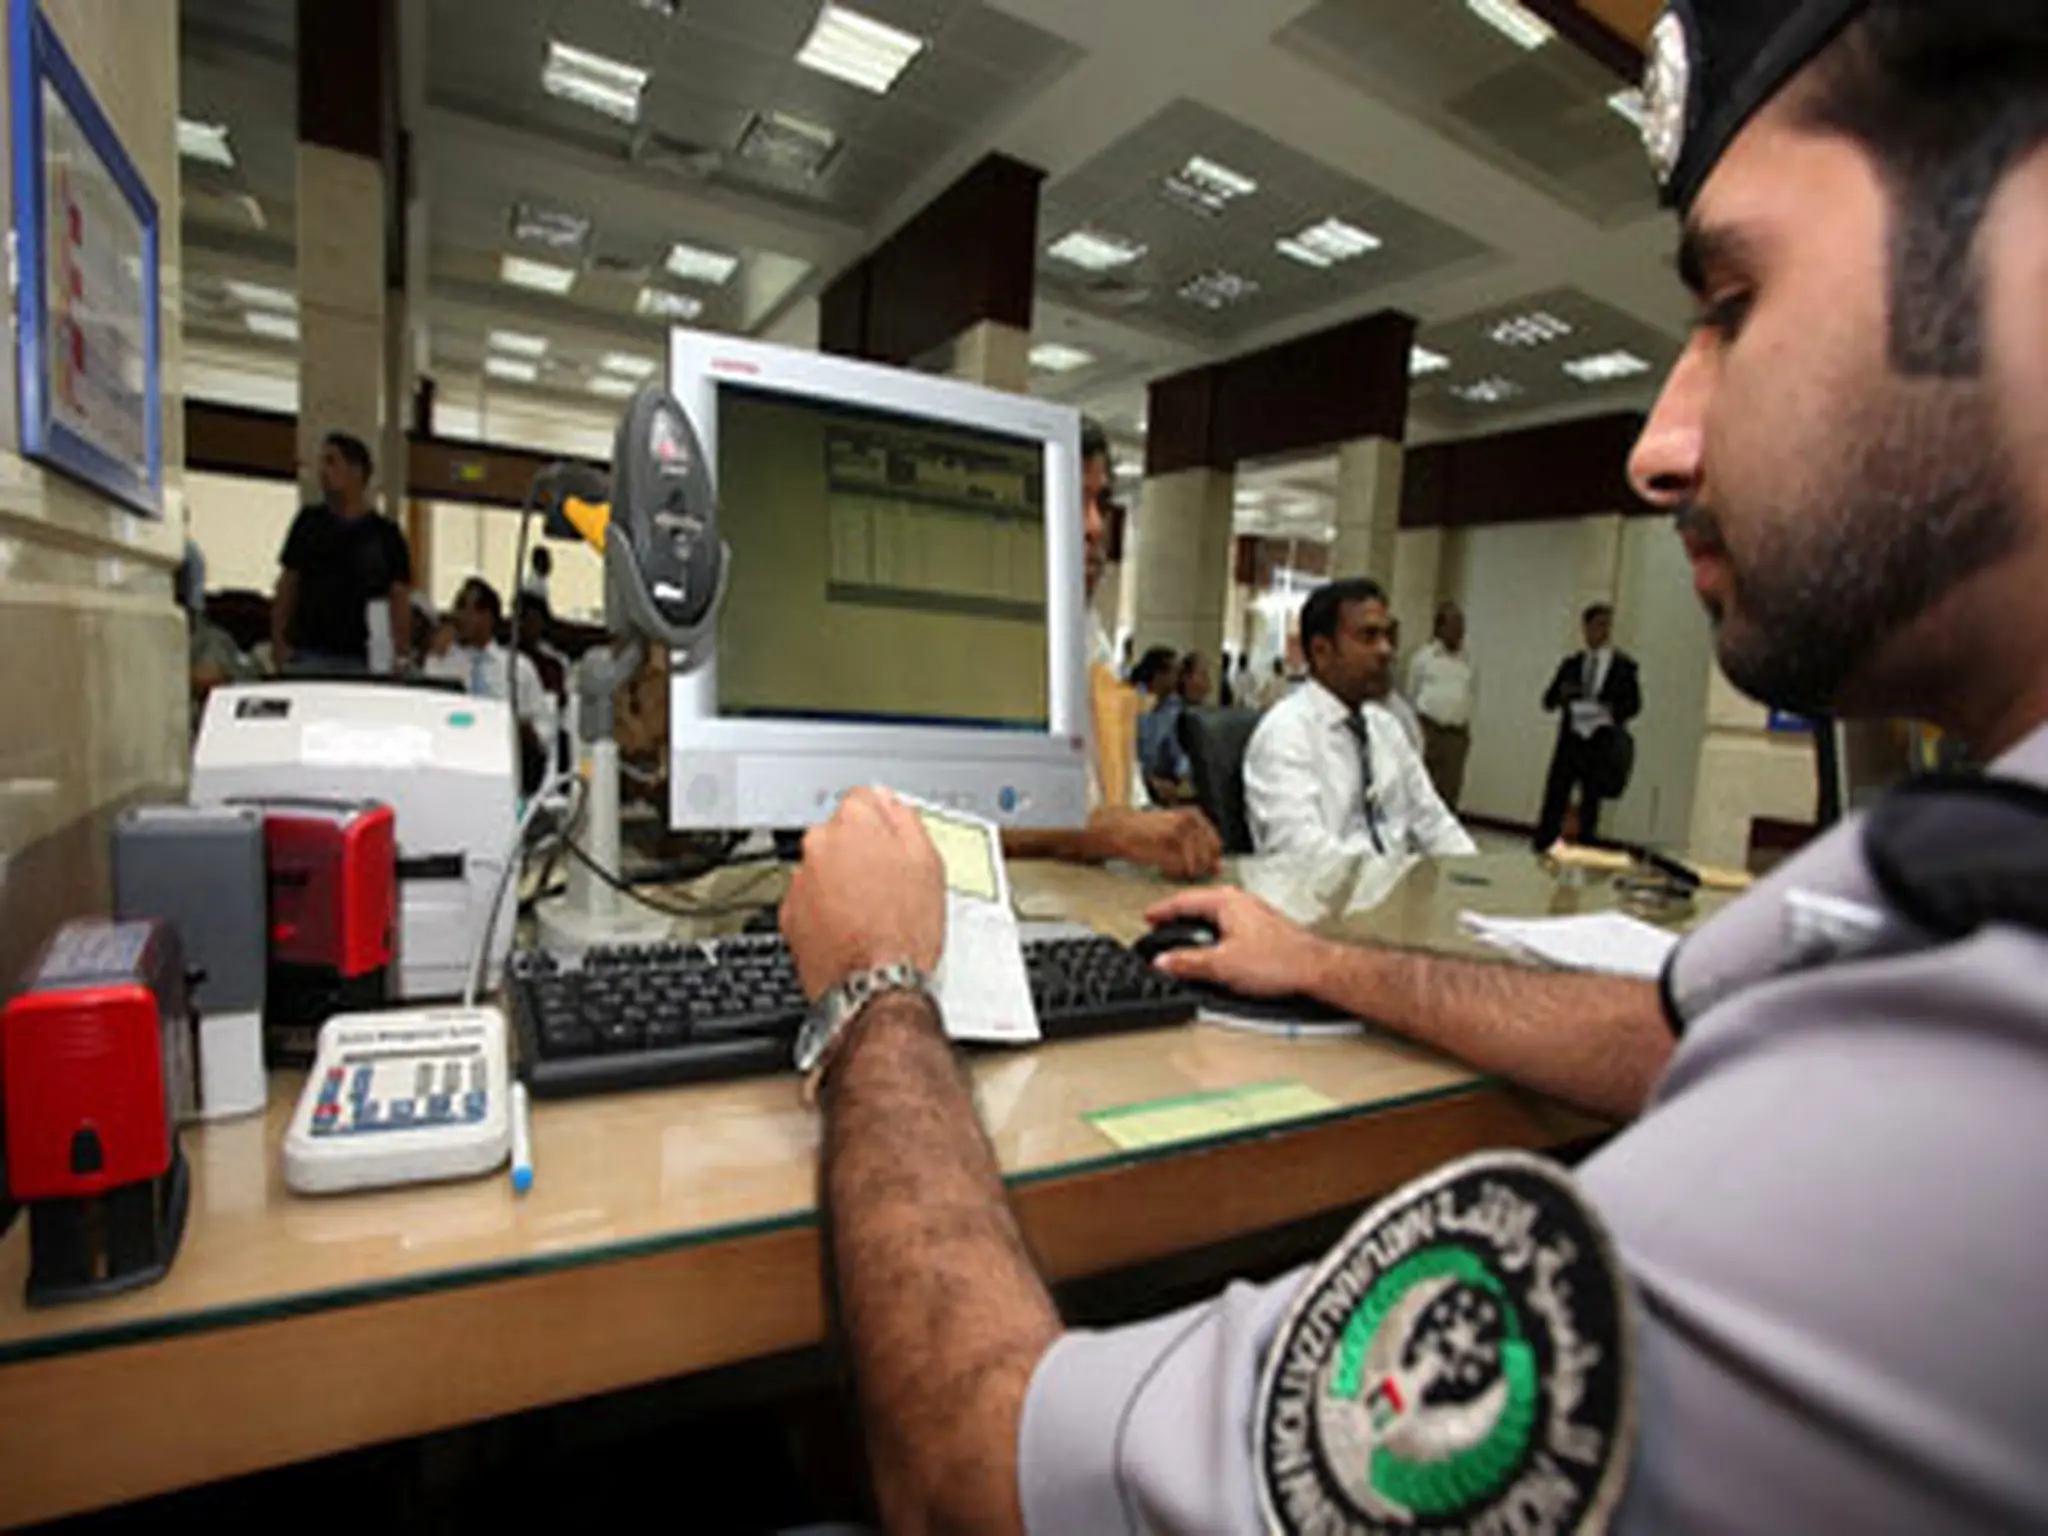 The UAE government announces 5 types of long-stay visas without a sponsor